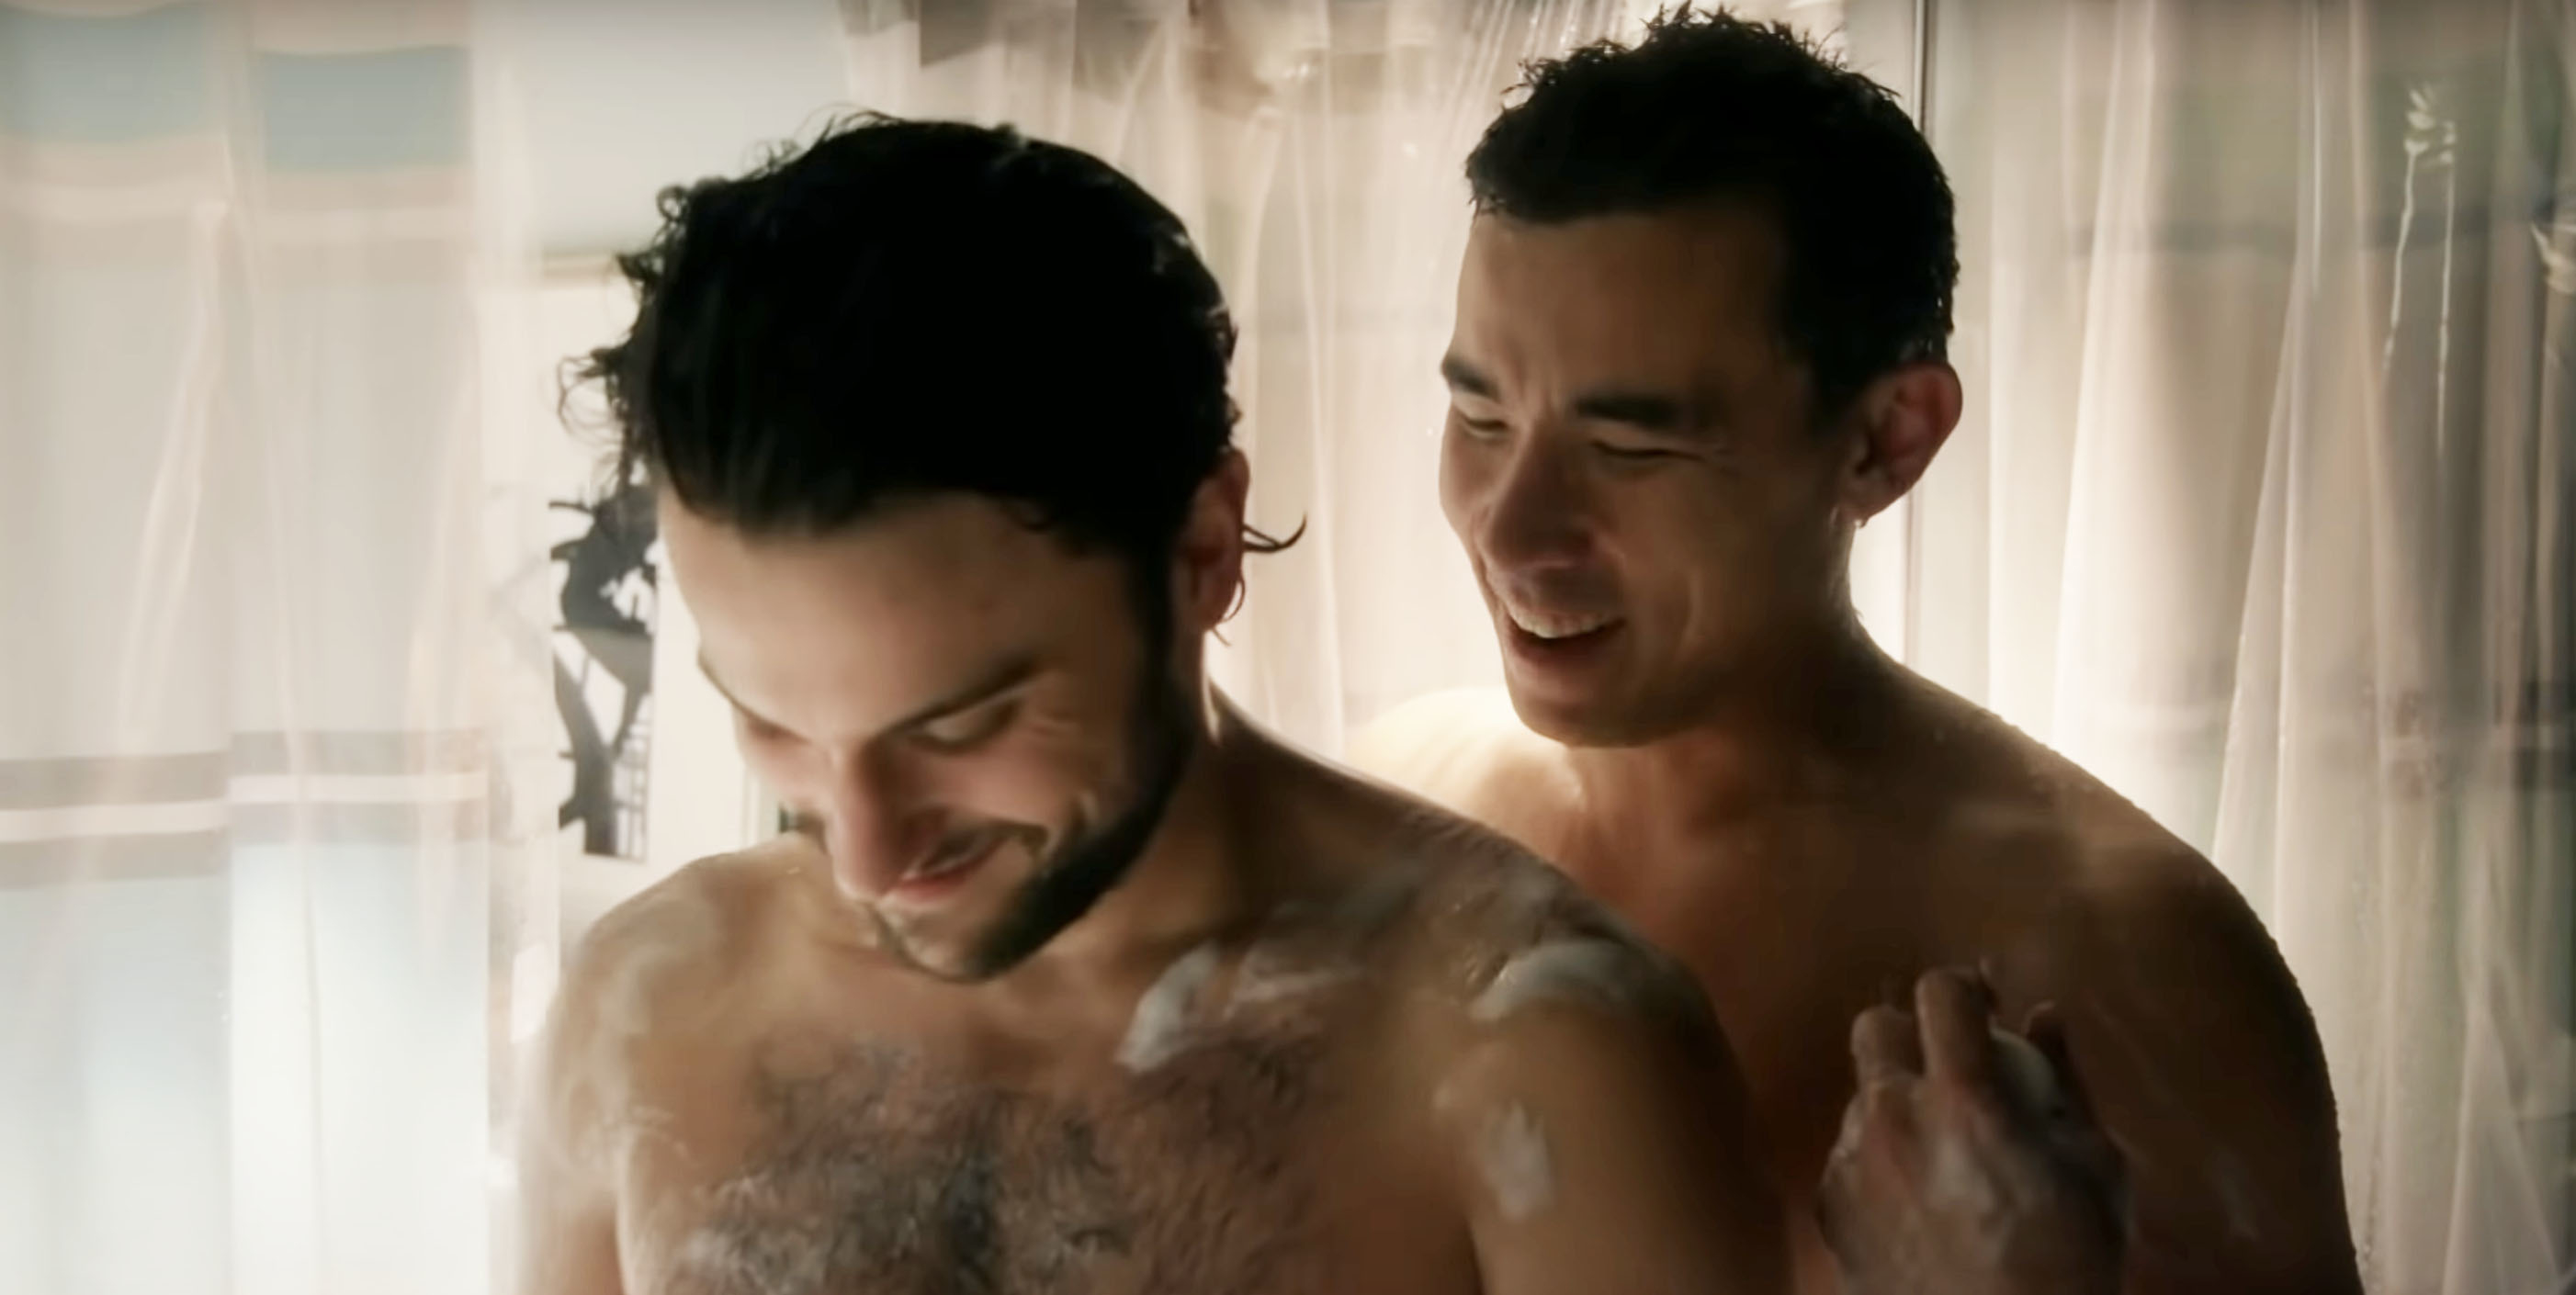 two men taking a shower together